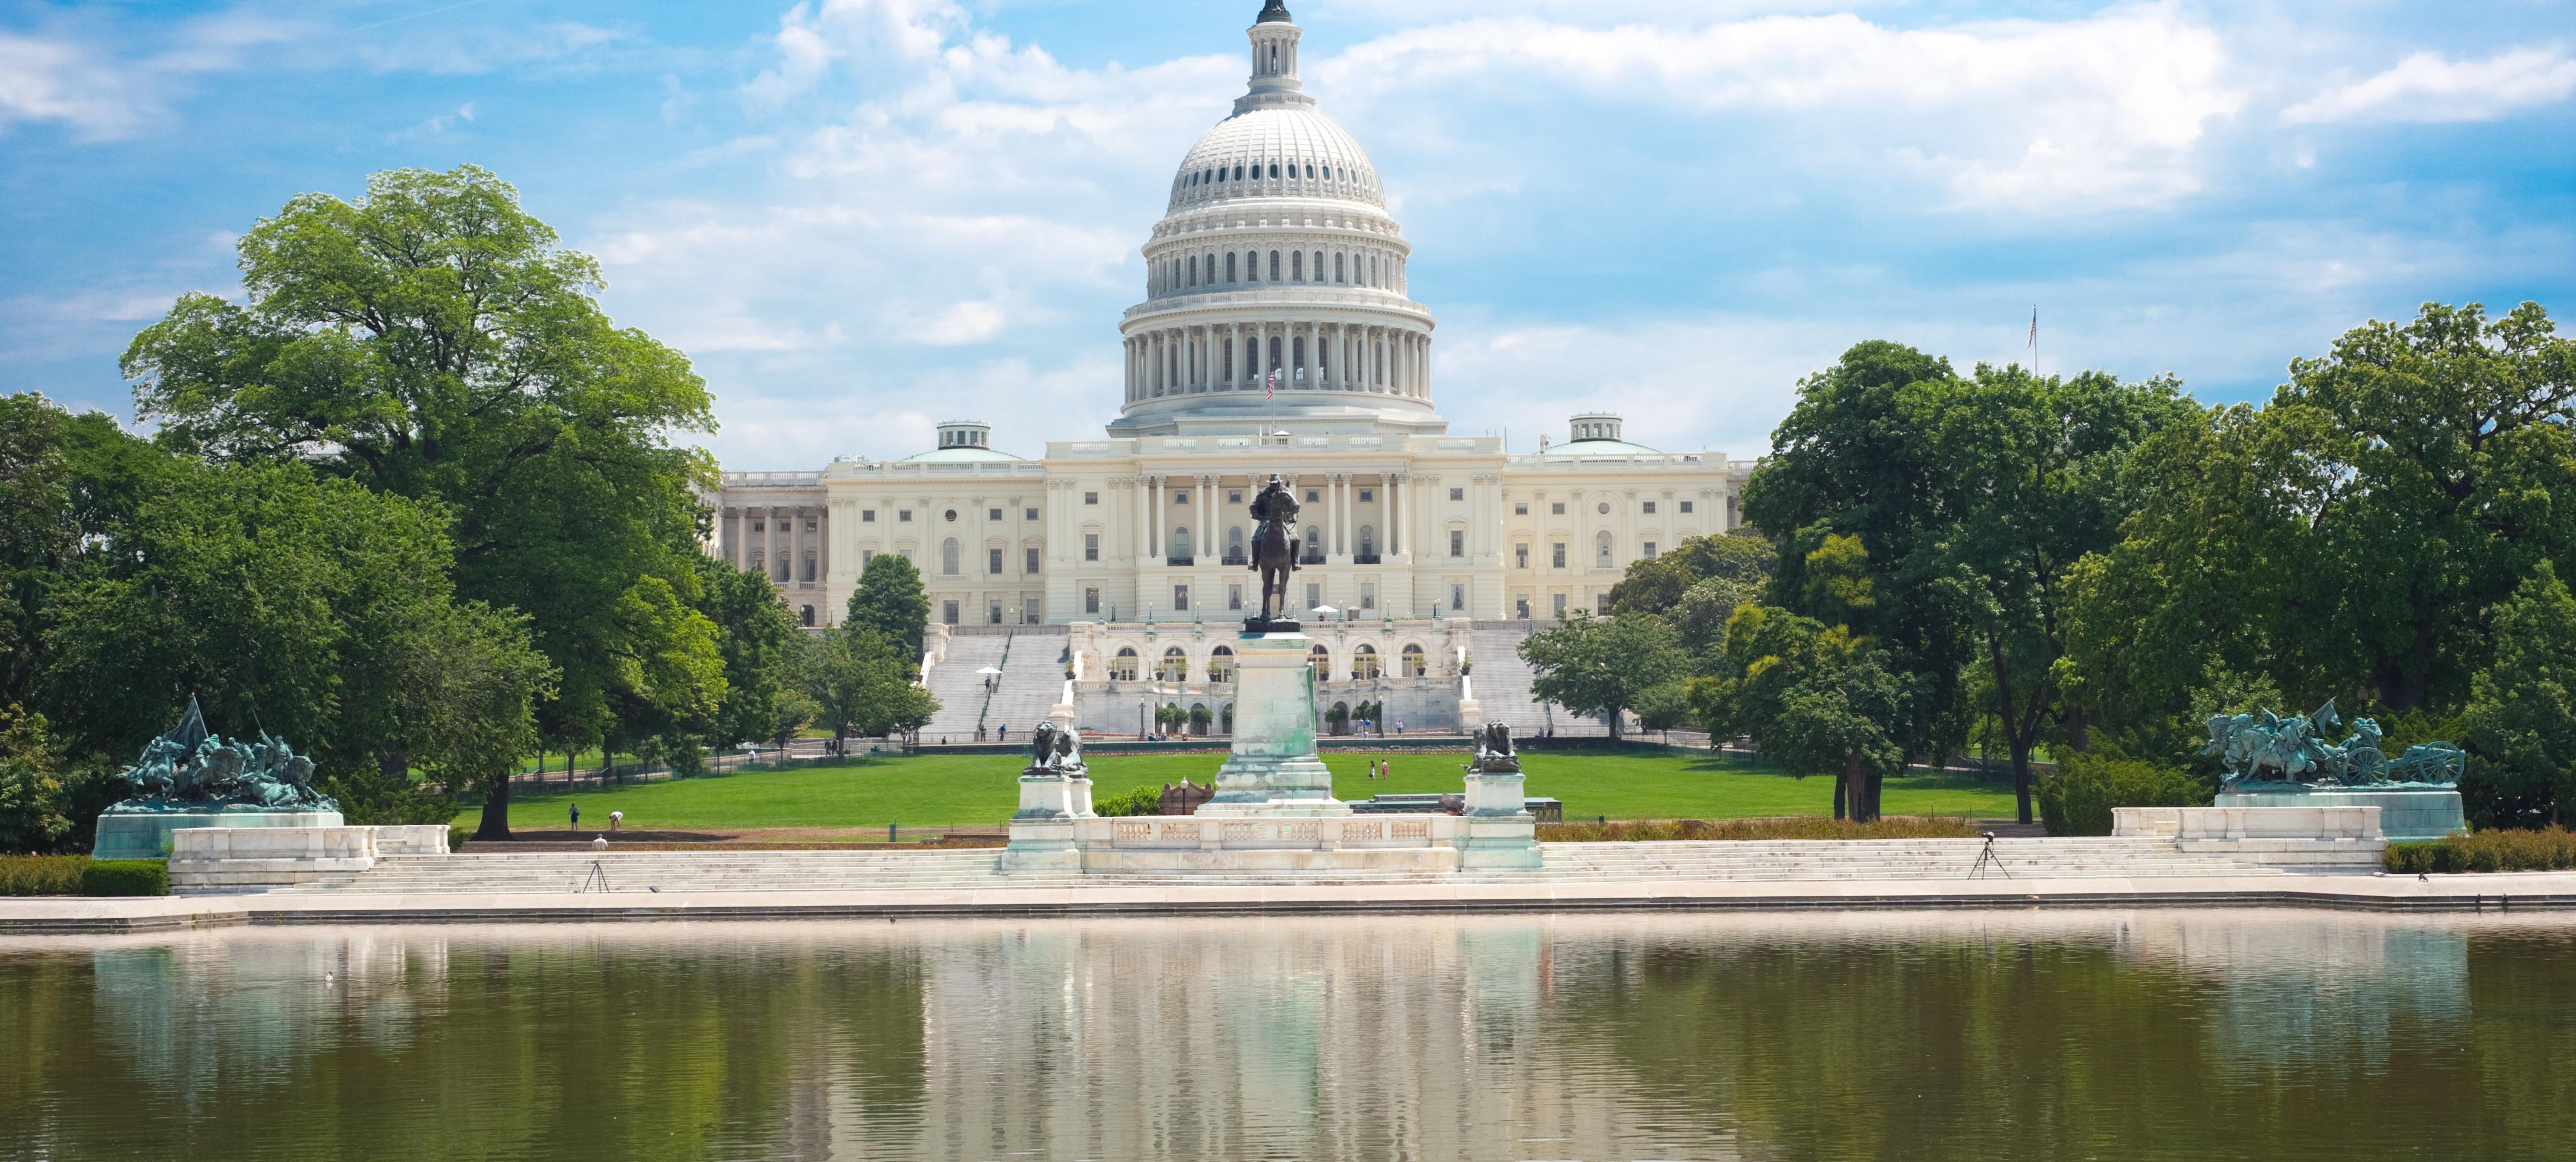 Washington DC Day Tour: 30 monuments and attractions